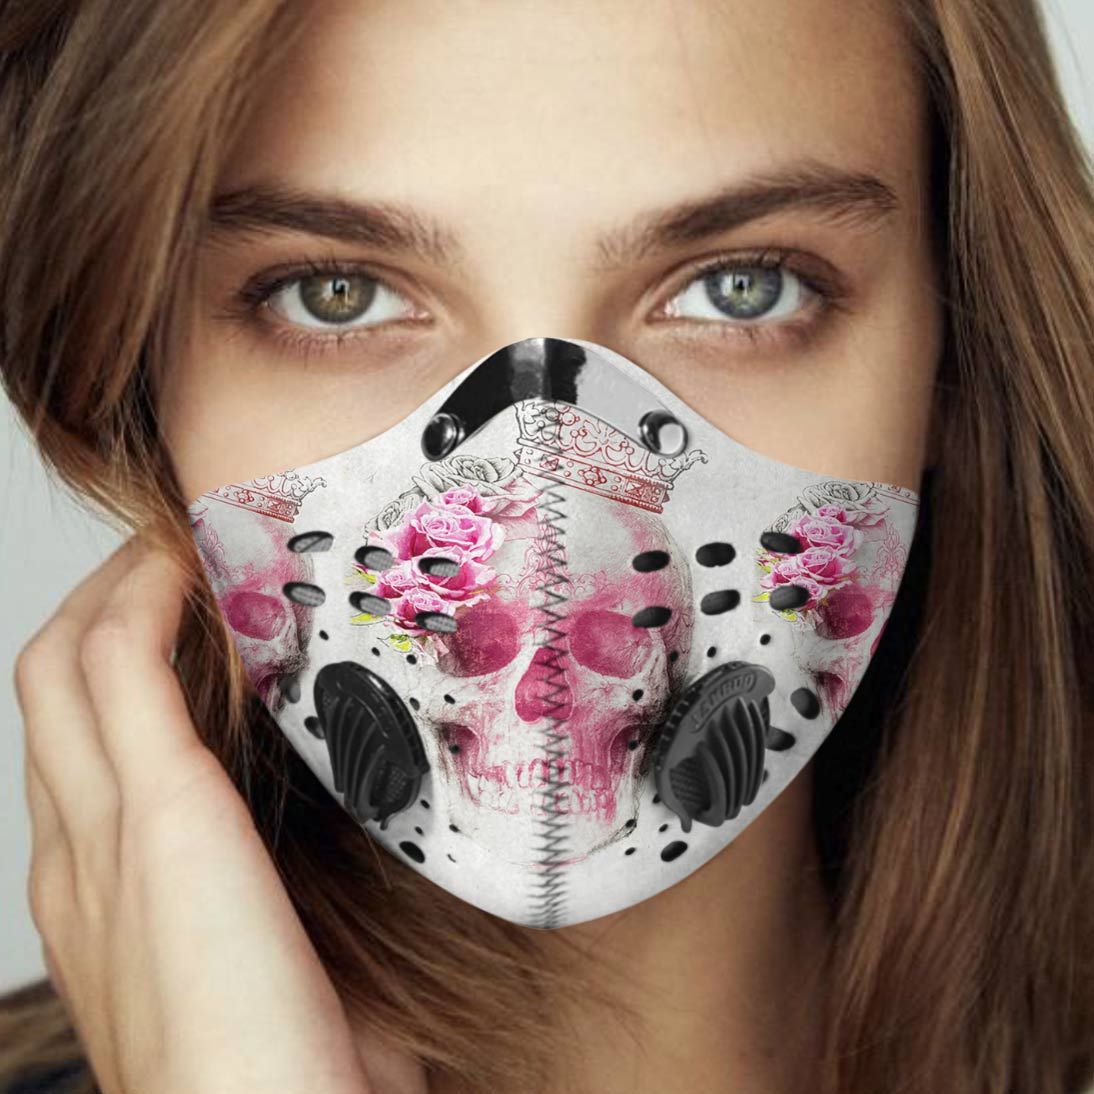 Floral skull queen carbon pm 2.5 face mask